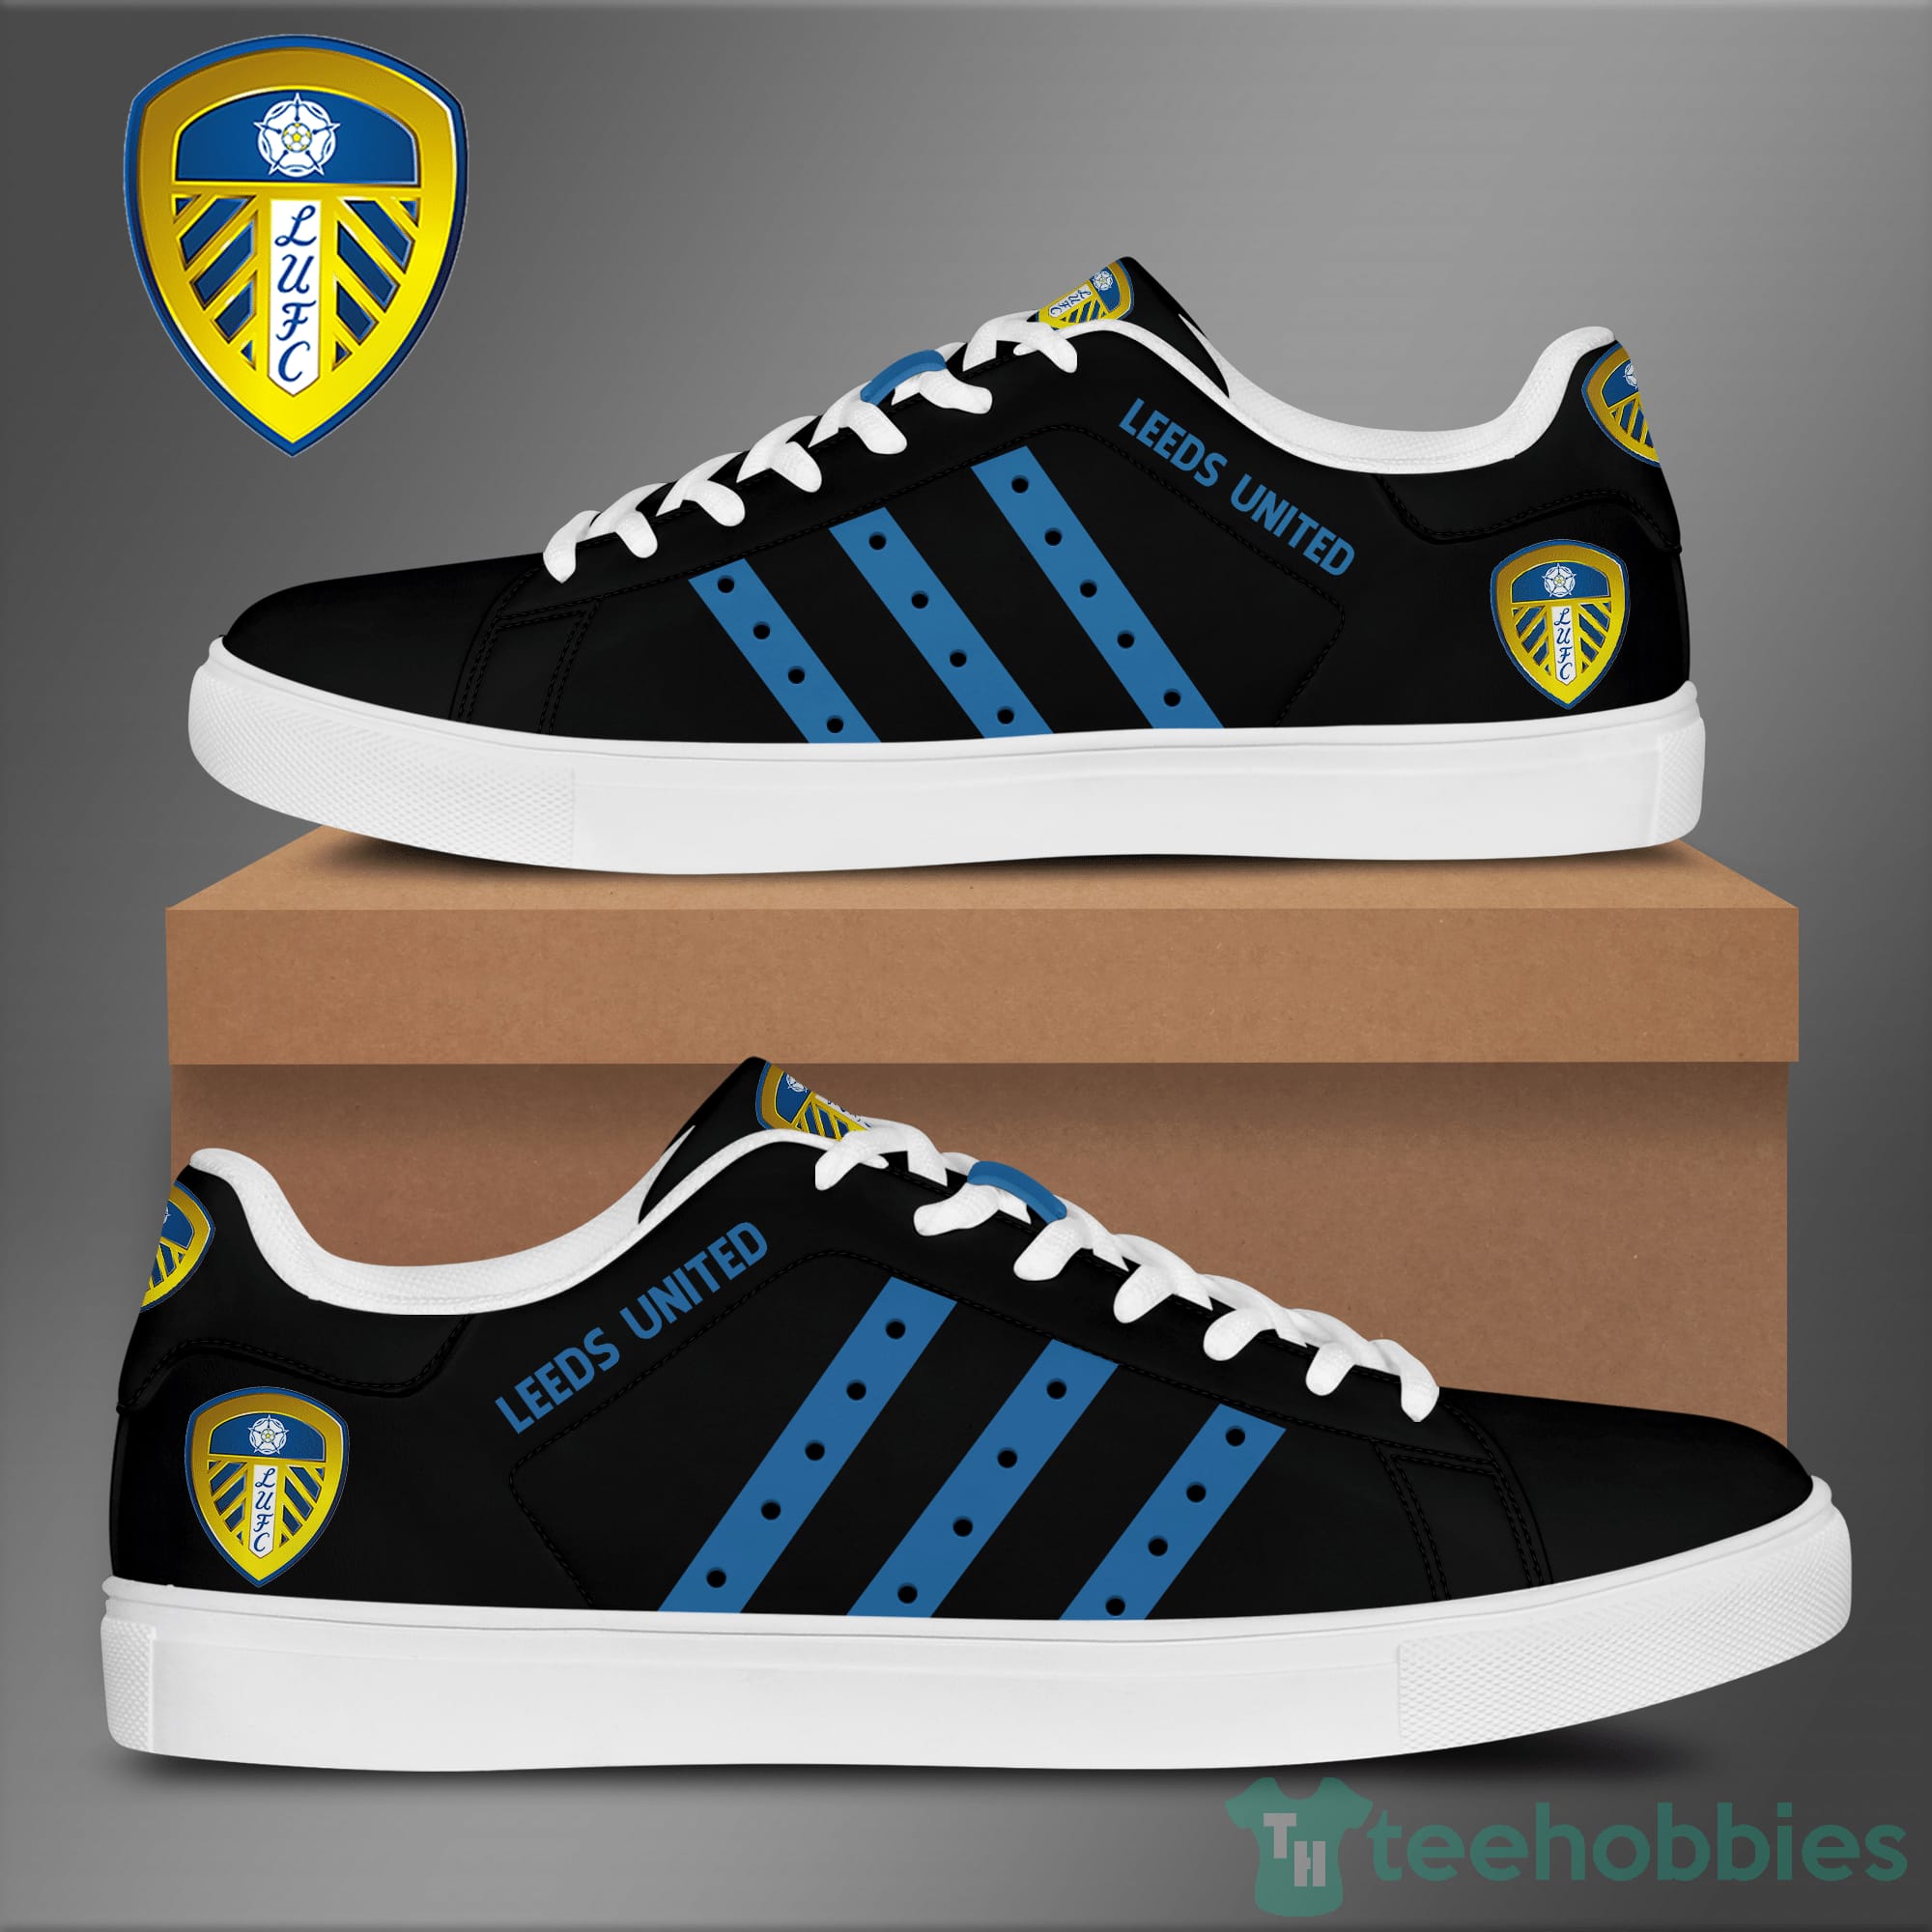 Leeds United F.C Black Low Top Skate Shoes Product photo 1